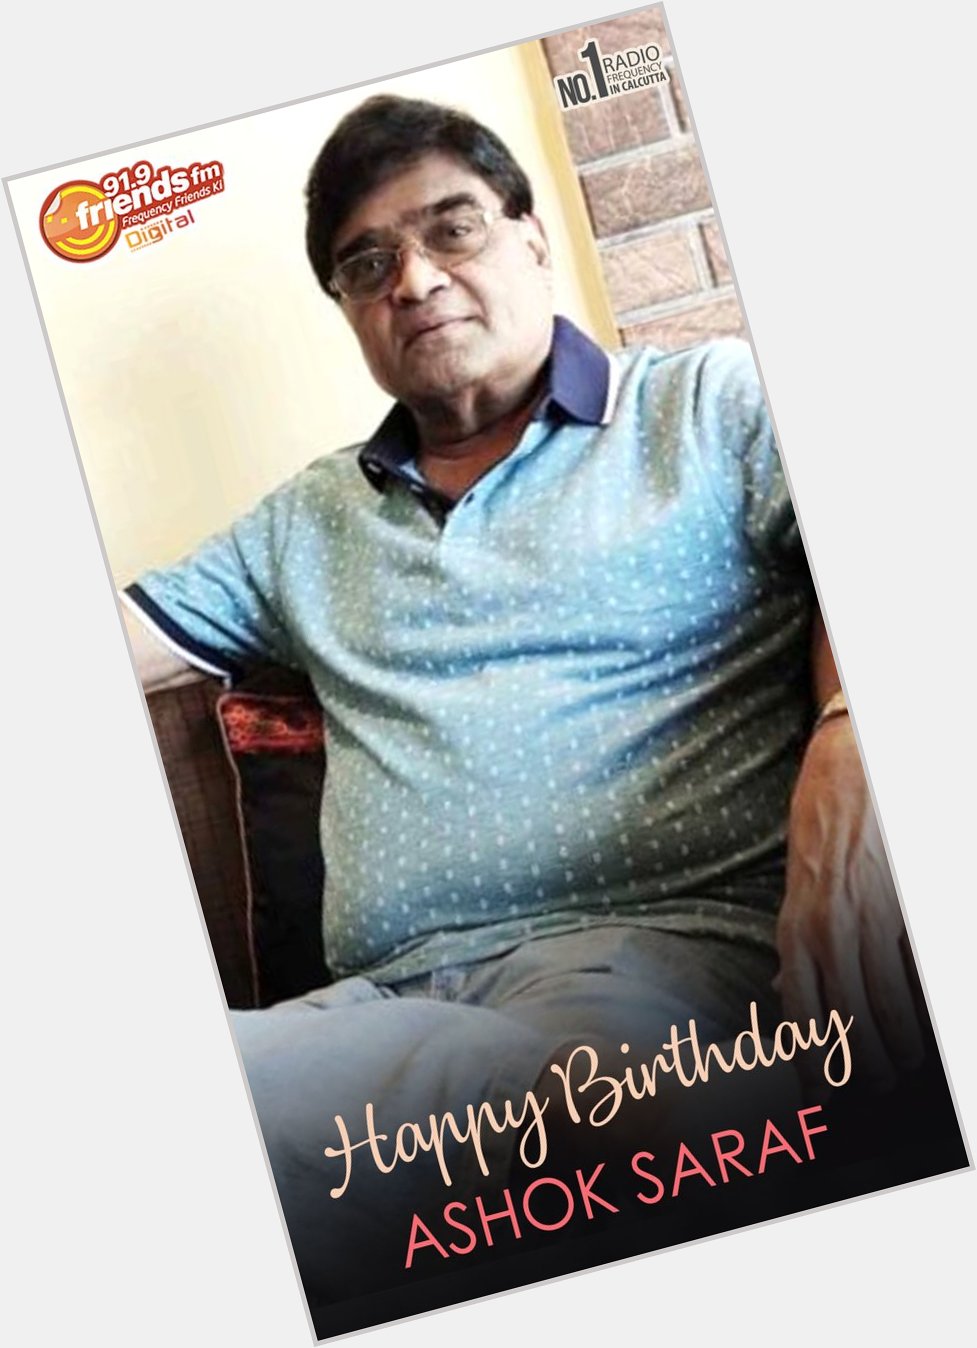 To the Hum Paanch man, Ashok Saraf, a very happy birthday.  